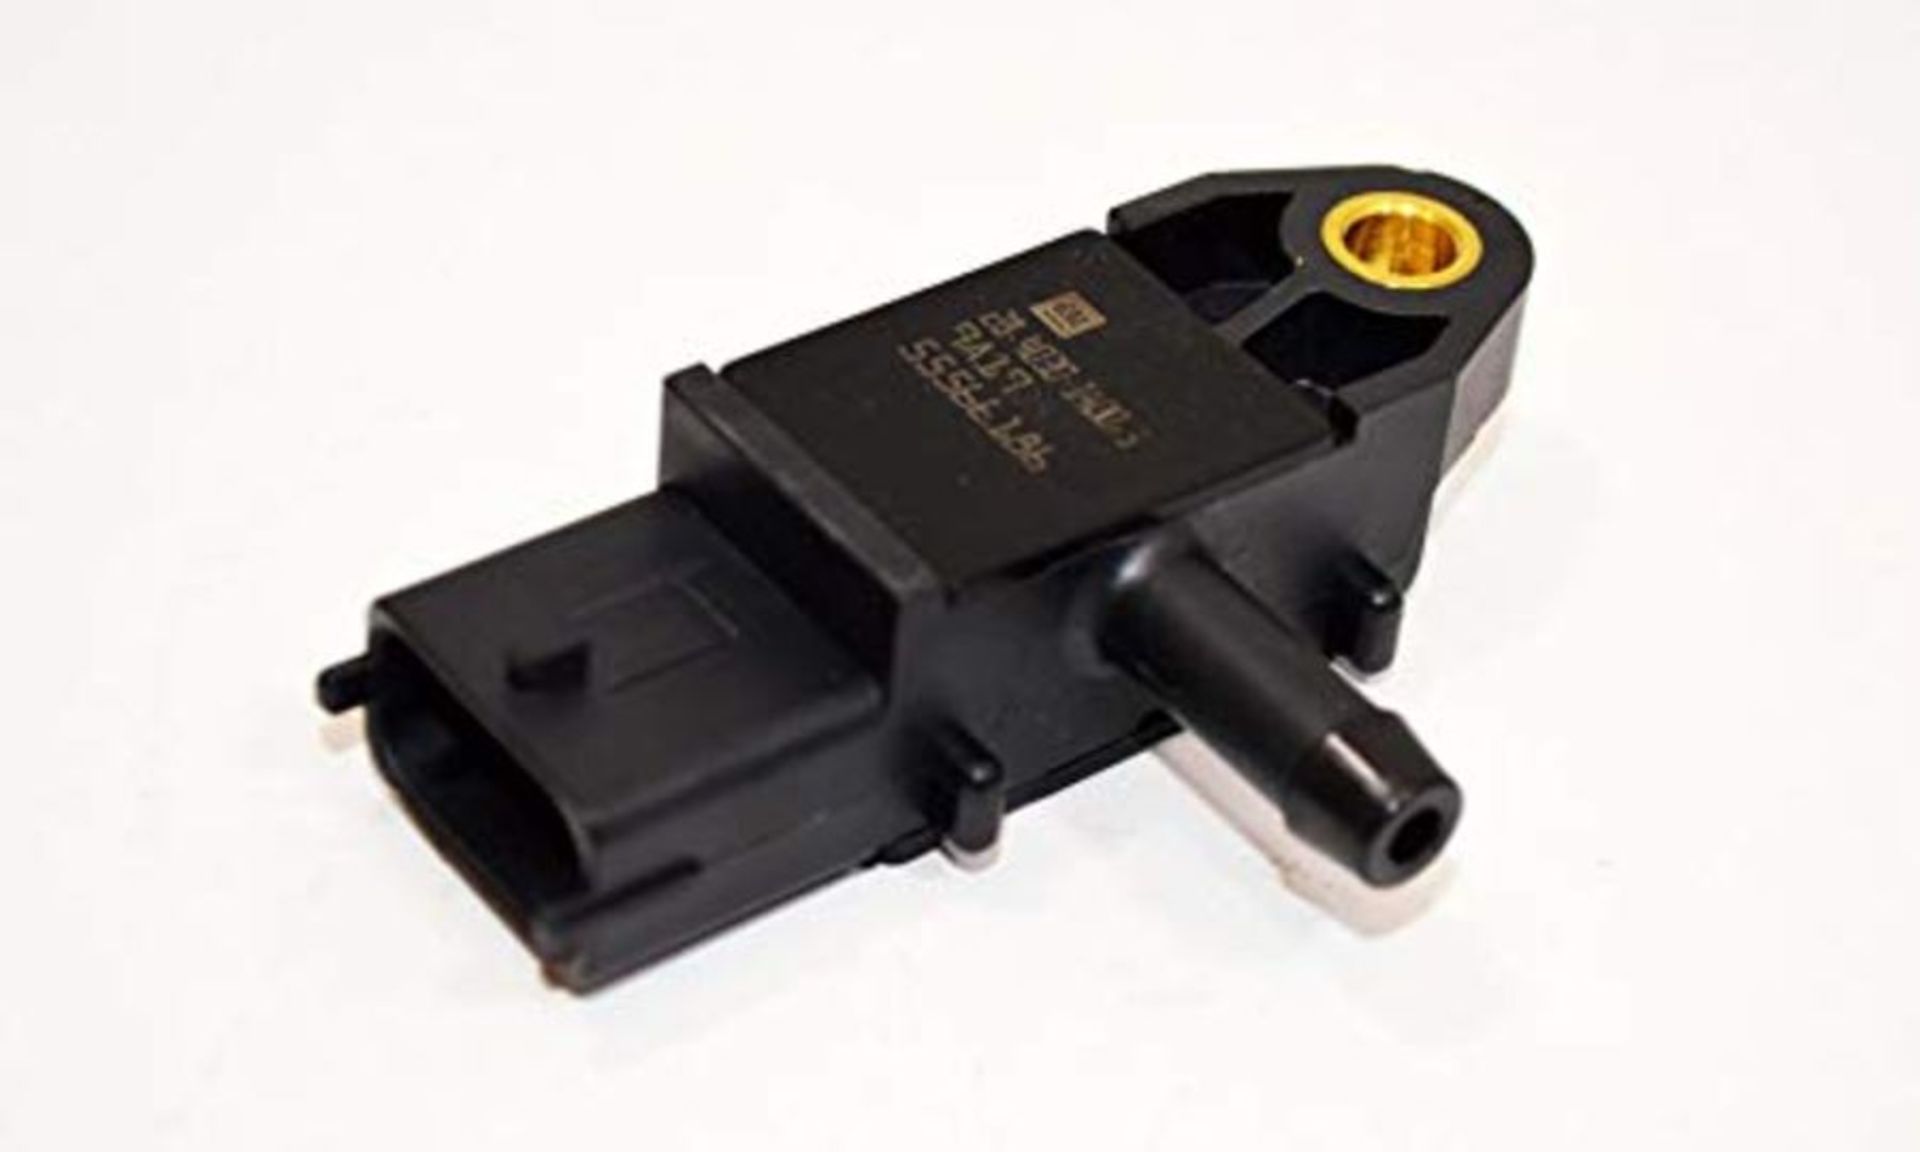 LSC 55566186 : GENUINE Exhaust Difference Pressure Sensor - NEW from LSC